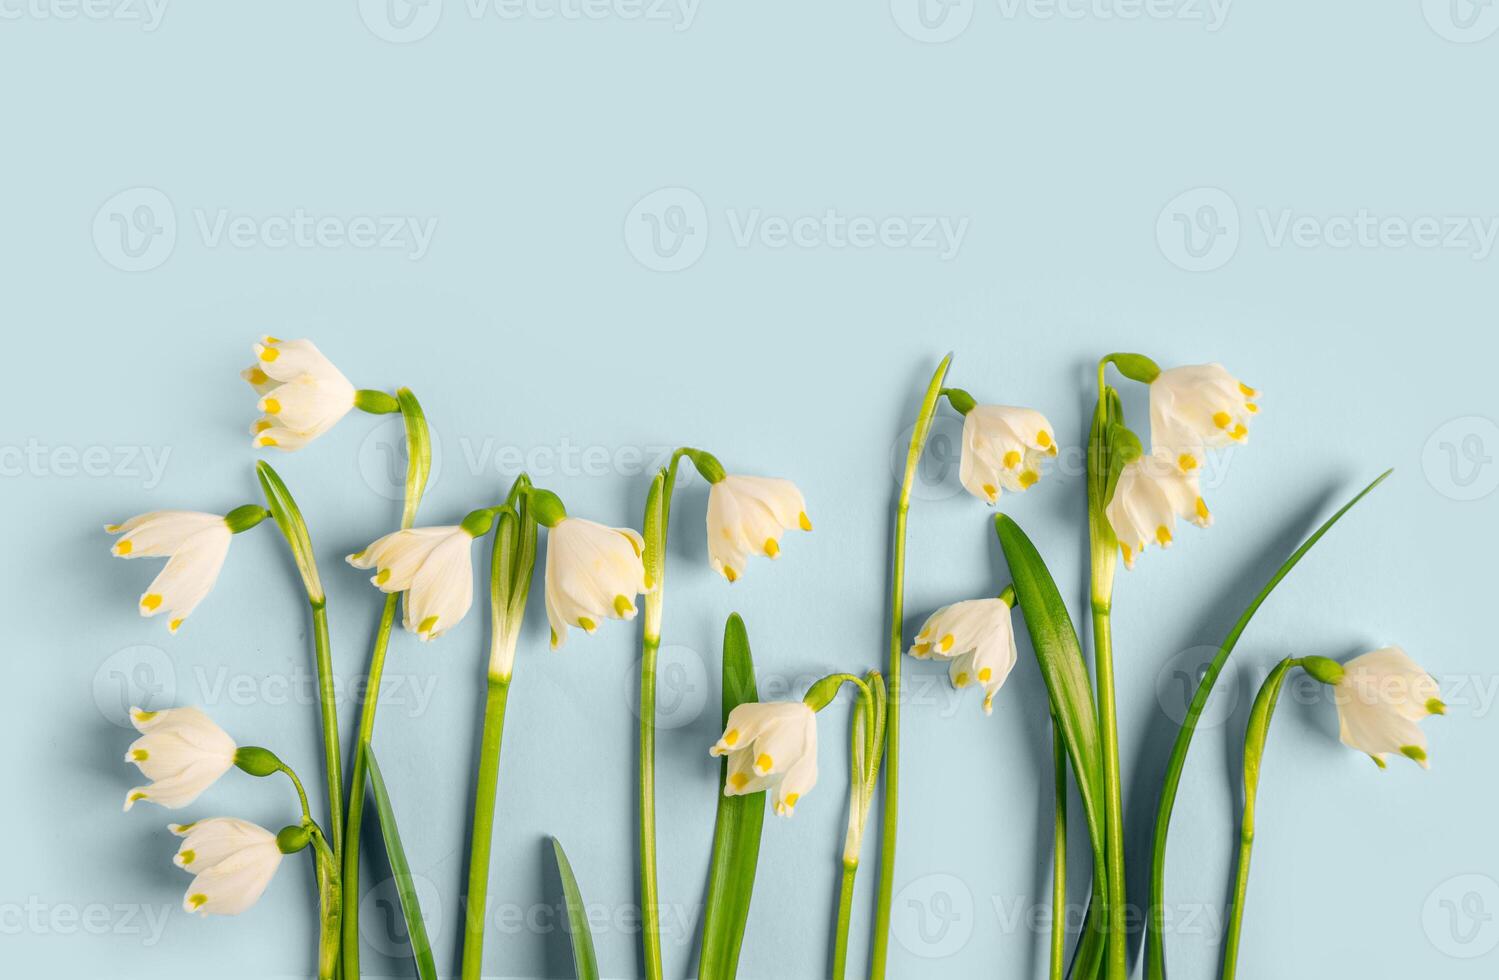 Composition of flowers. Frame of snowdrop flowers on a blue background. Flat lay, top view, copy space. photo